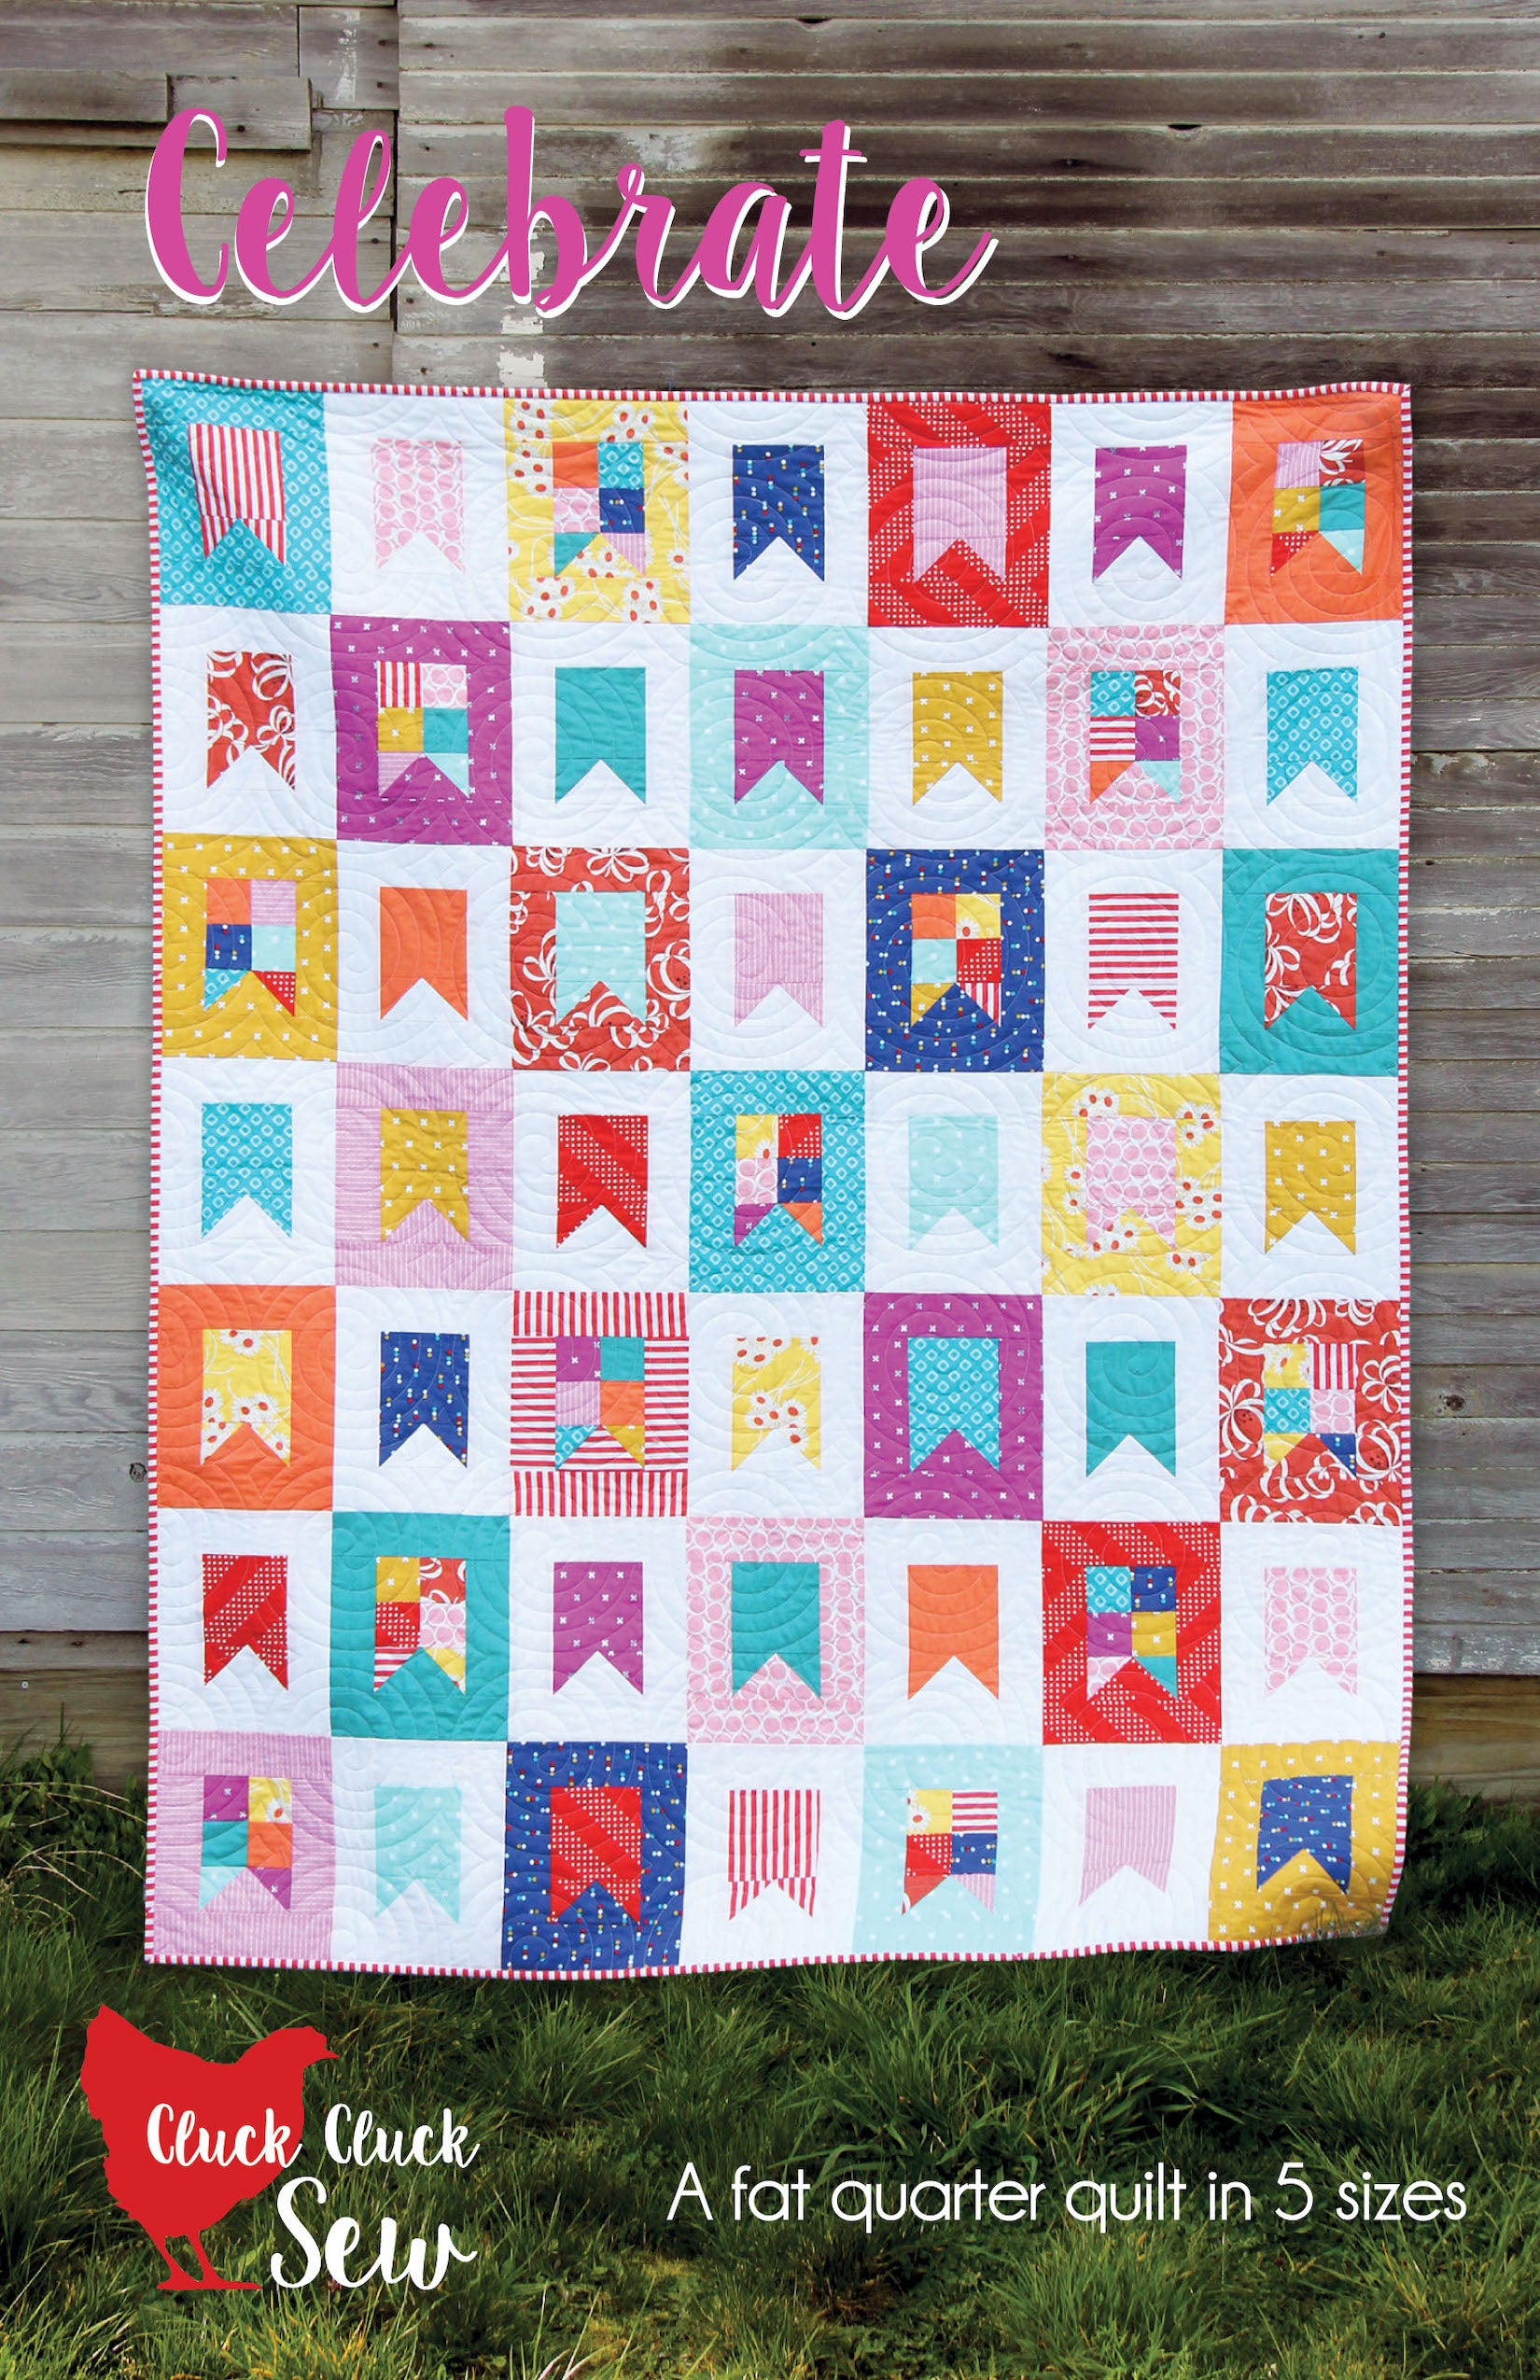 Celebrate Quilt Pattern by Cluck Cluck Sew